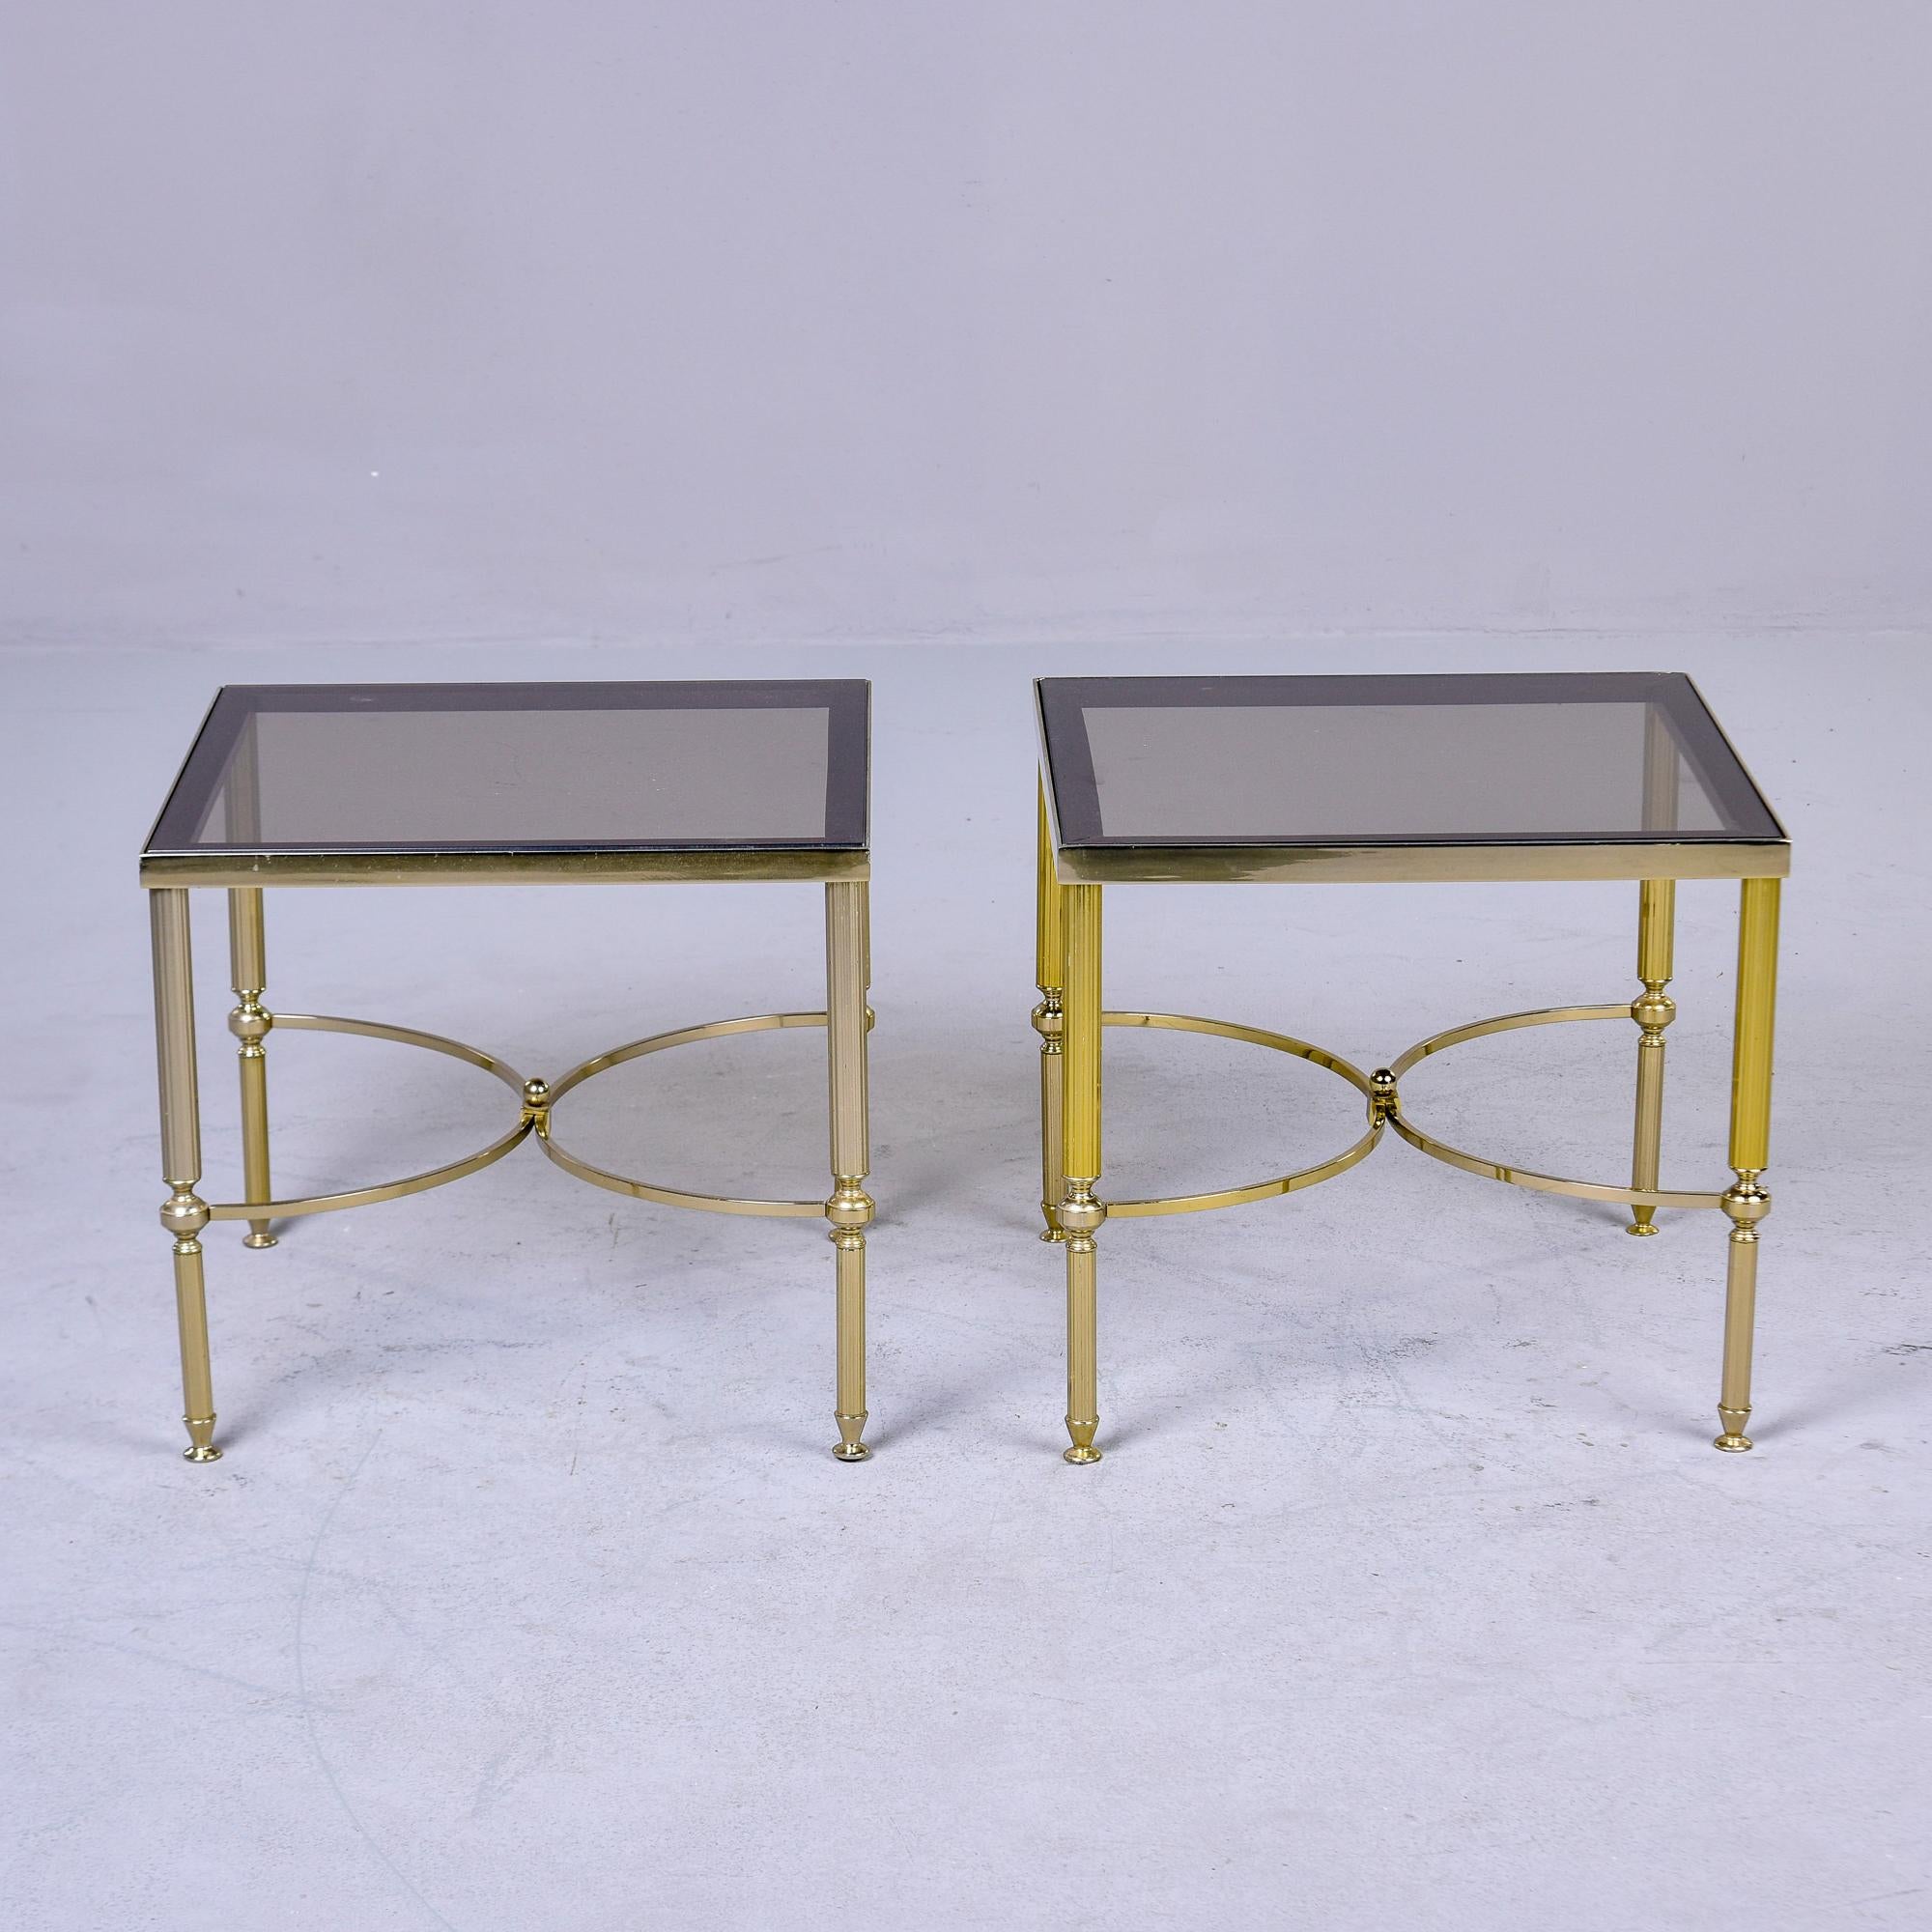 Found in France, this pair of side tables date from the 1960s.  Brass legs are reeded with little feet and decorative, curved stretchers. Inset table tops are light smoke colored glass tops. Sold and priced as a pair. Unknown maker. 